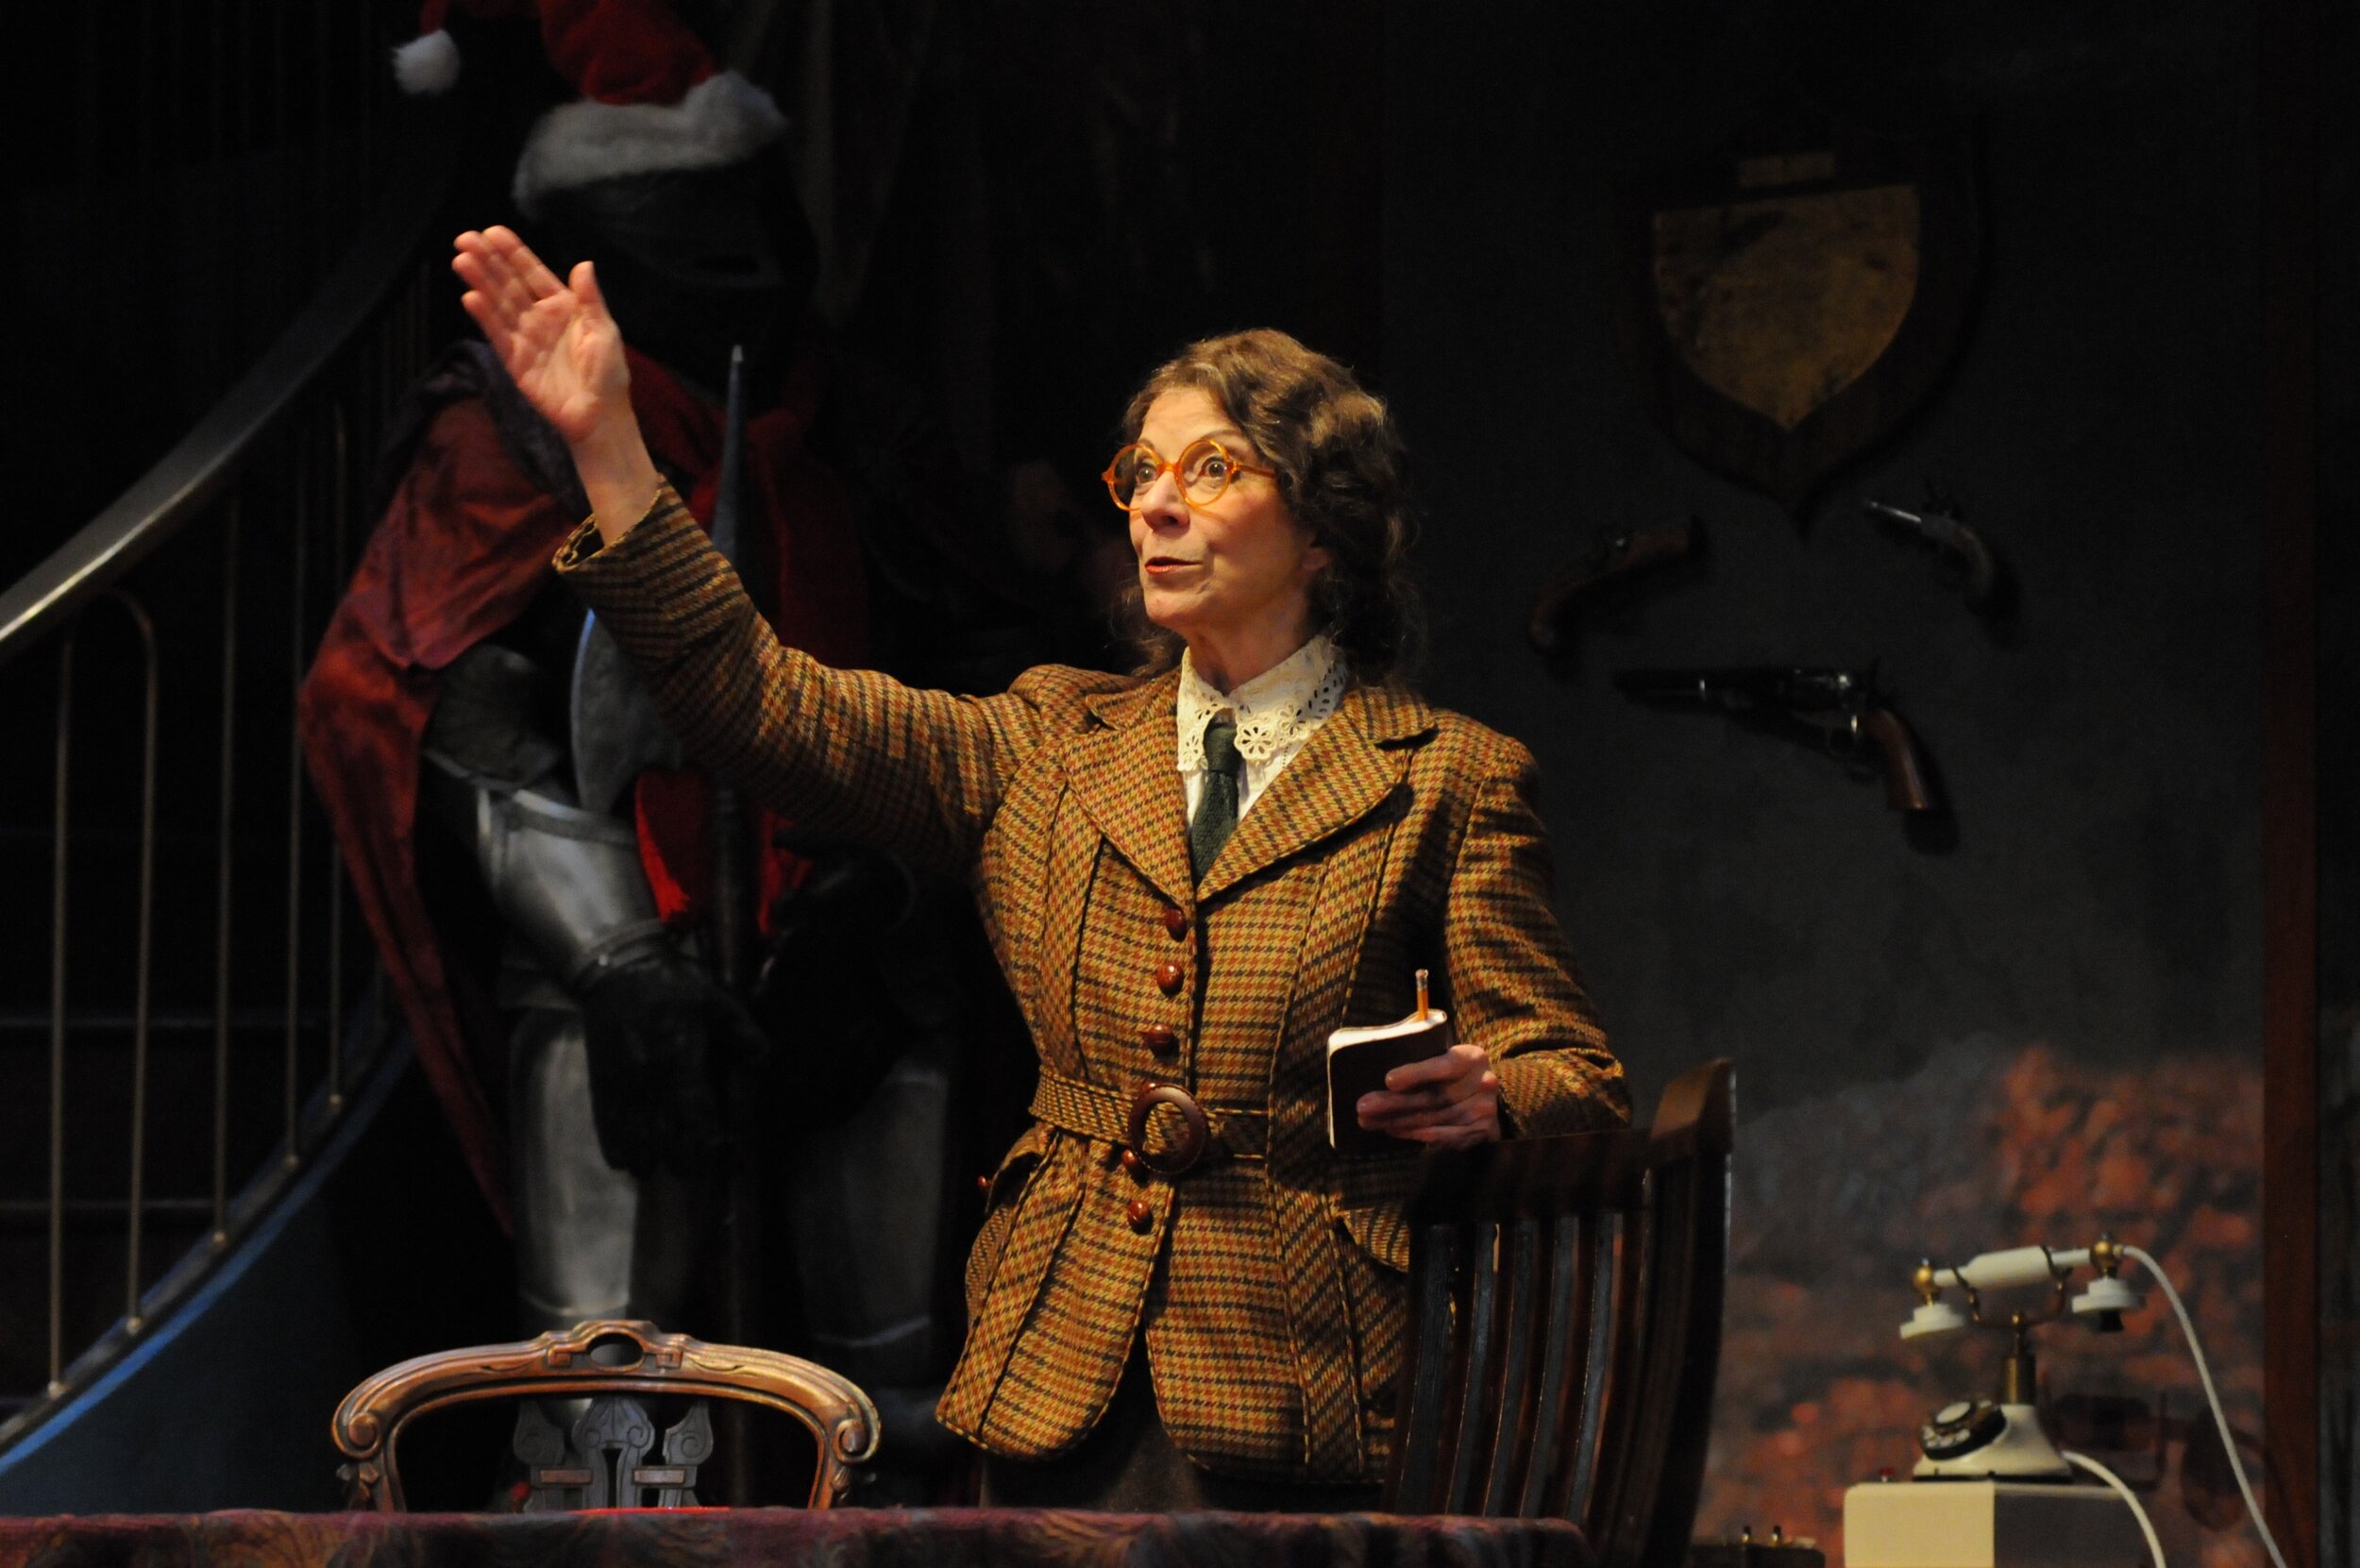  Carolyn Michel as Inspector Goring in "The Game's Afoot" at Asolo Rep. Photo: BARBARA BANKS  